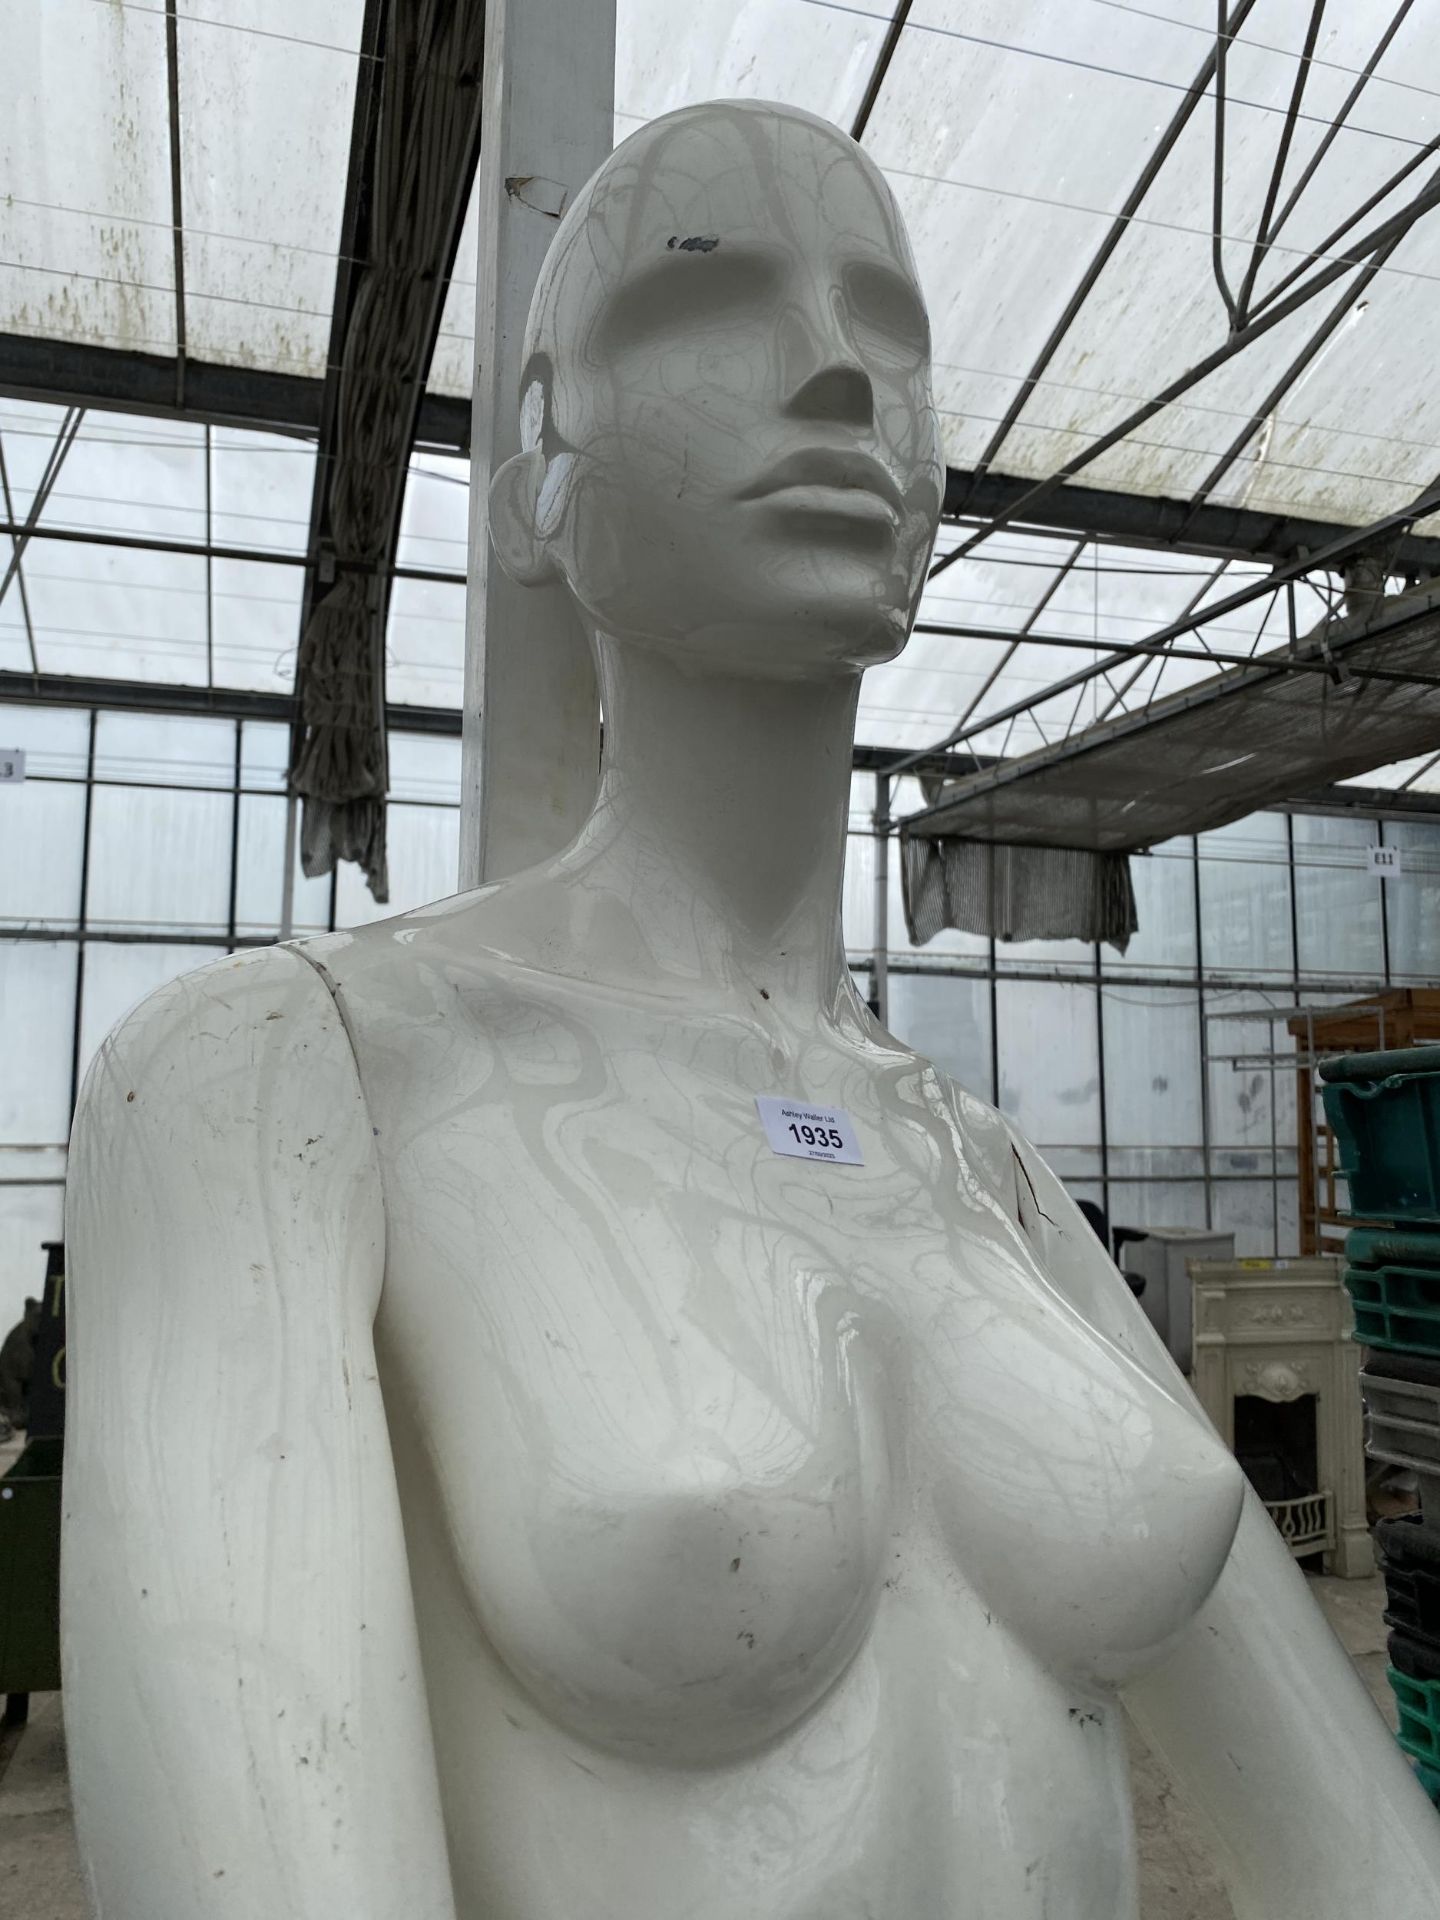 A FEMALE LIFE SIZE MANNEQUIN MISSING A HAND - Image 2 of 2